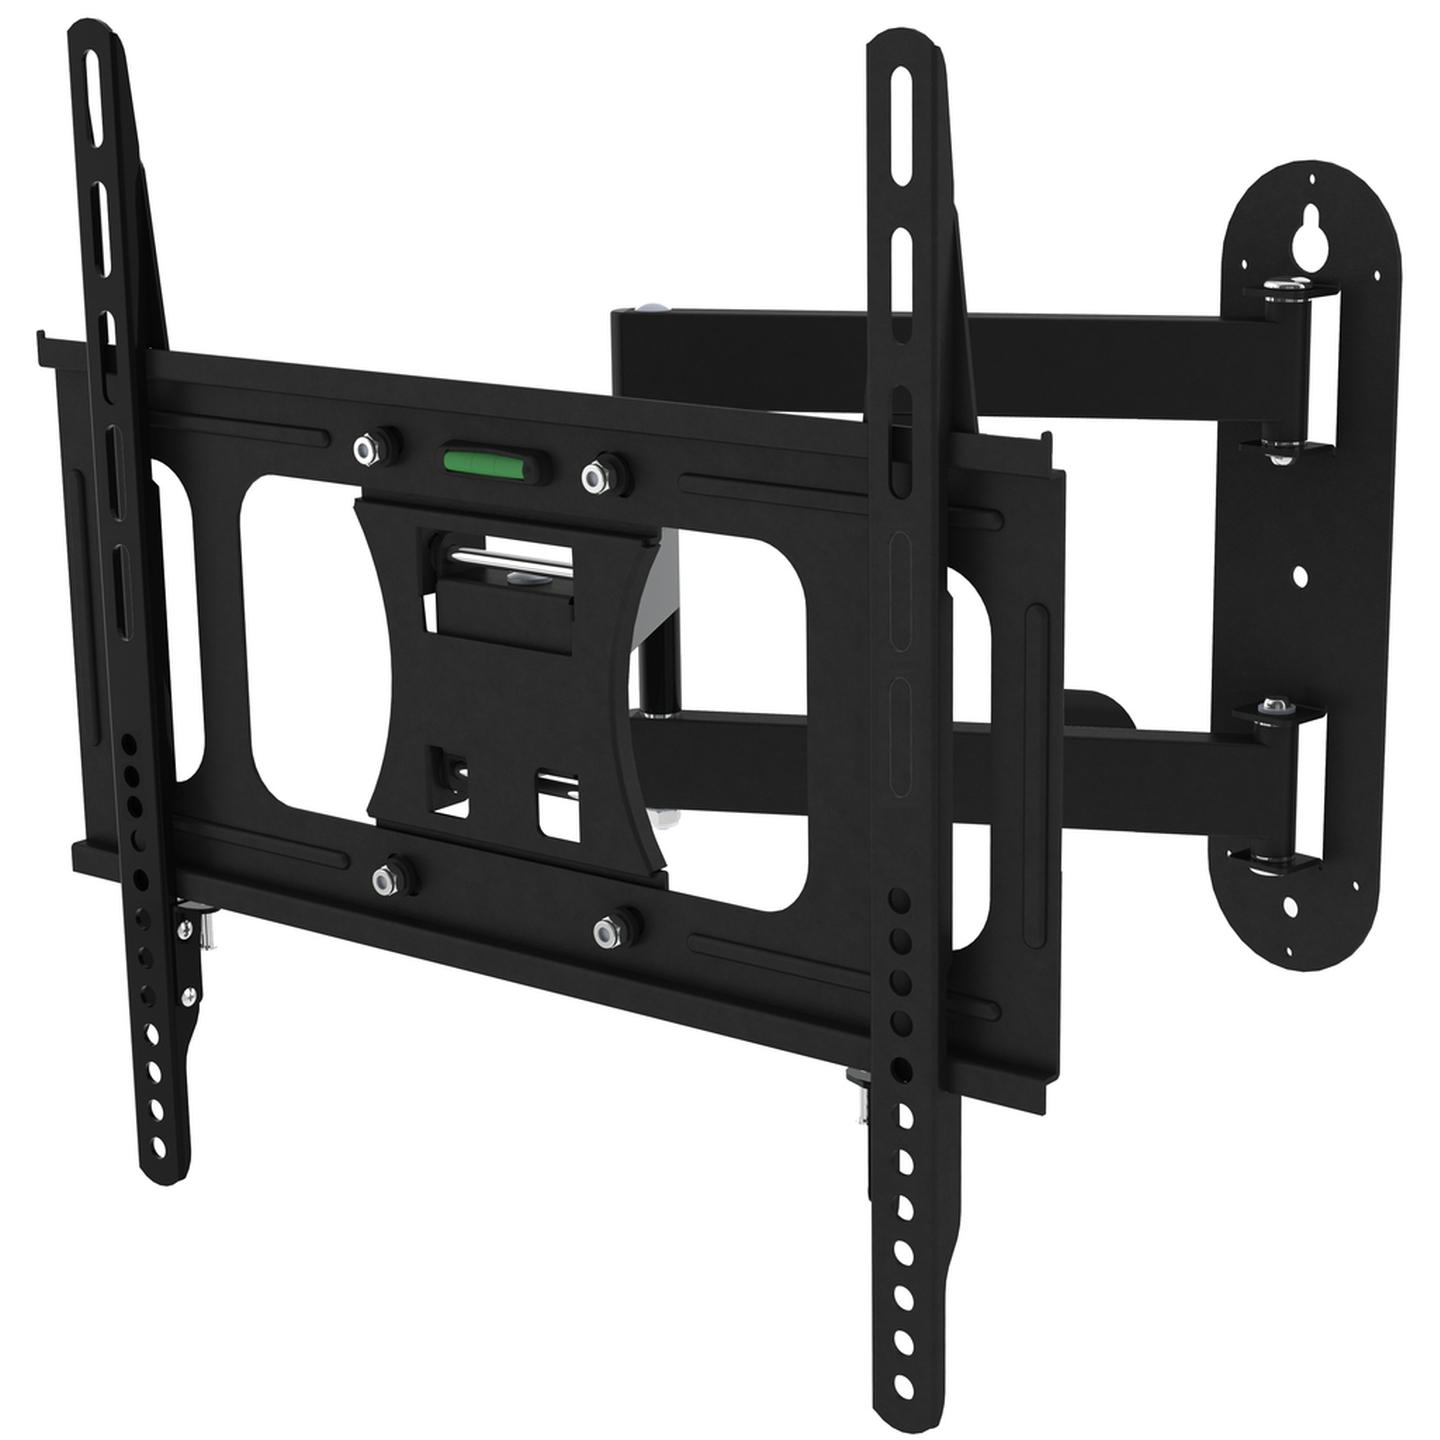 23-55 Inch LCD Monitor Wall Mount Bracket with 180 Degree Swivel